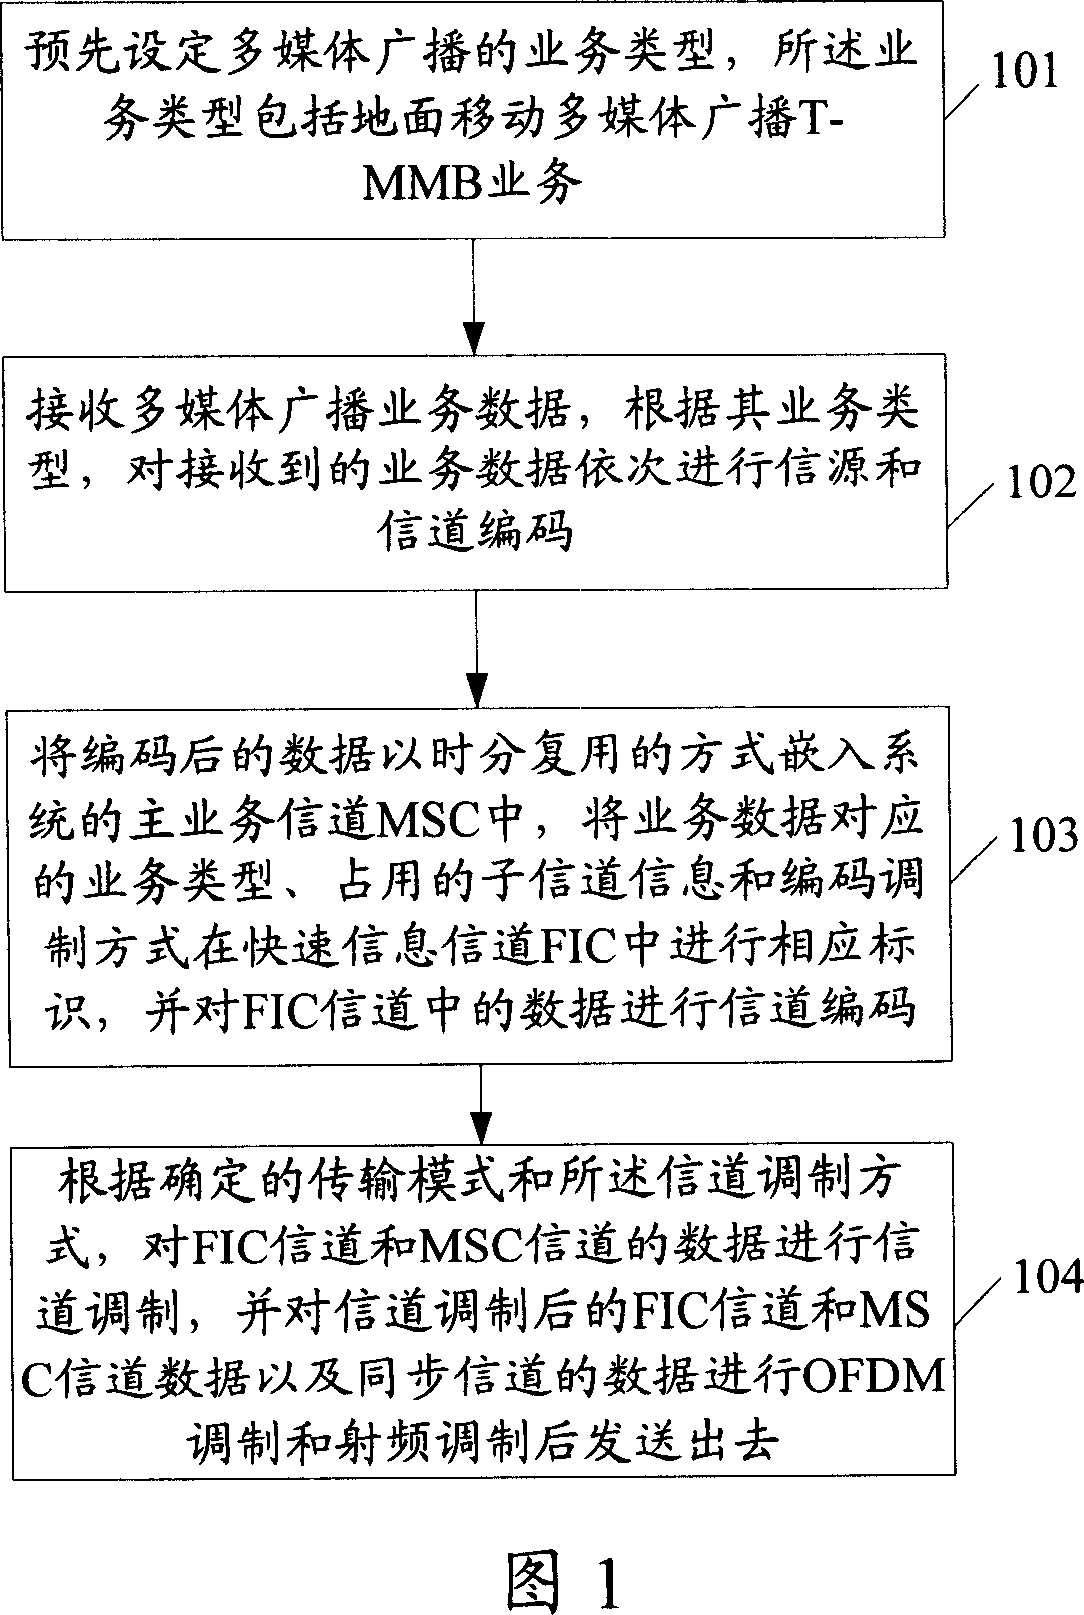 Compatiable DAB ground mobile multimedia broadcast receiving and transmitting method and system